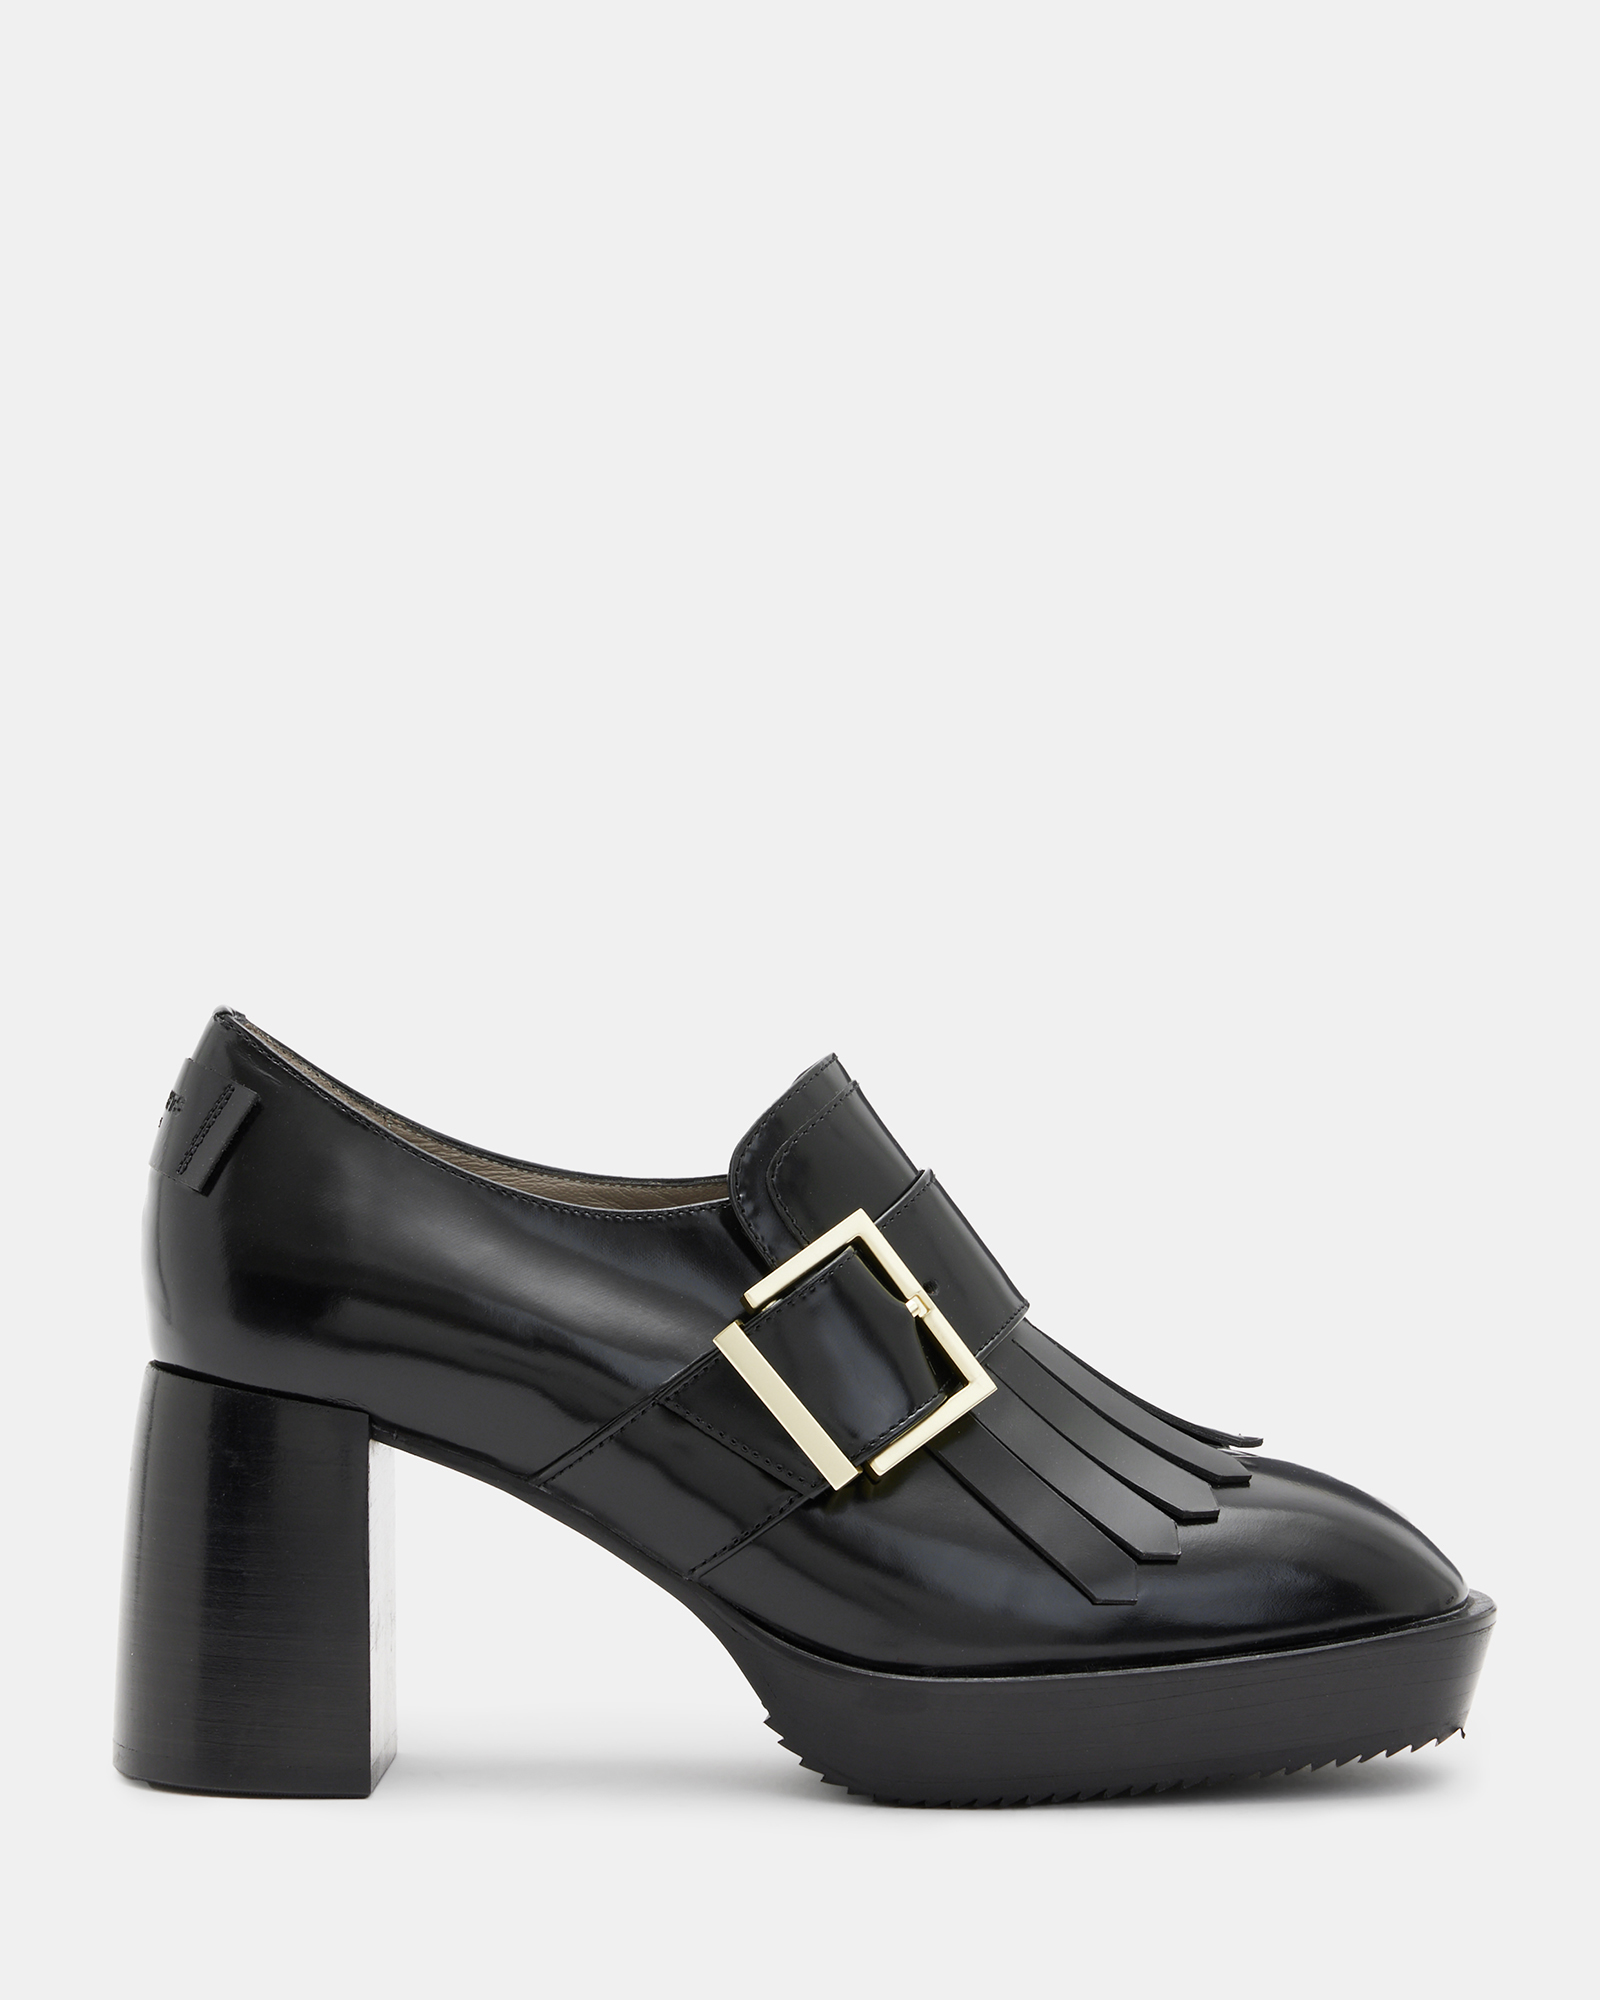 Zia Heeled Leather Loafers BLACK SHINE | ALLSAINTS